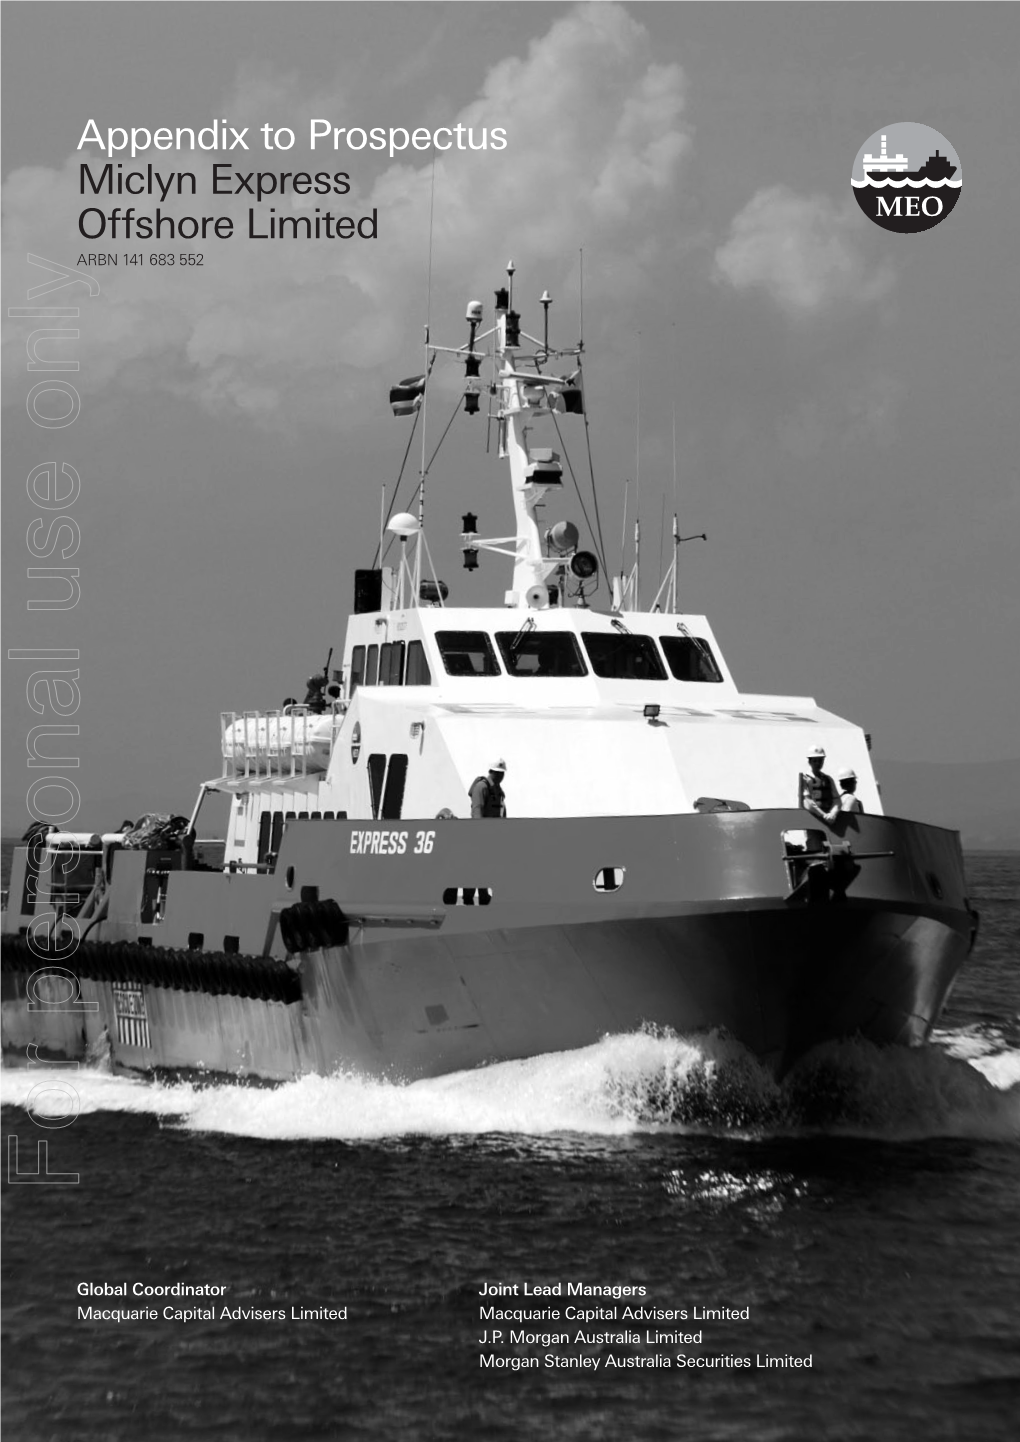 Miclyn Express Offshore Limited